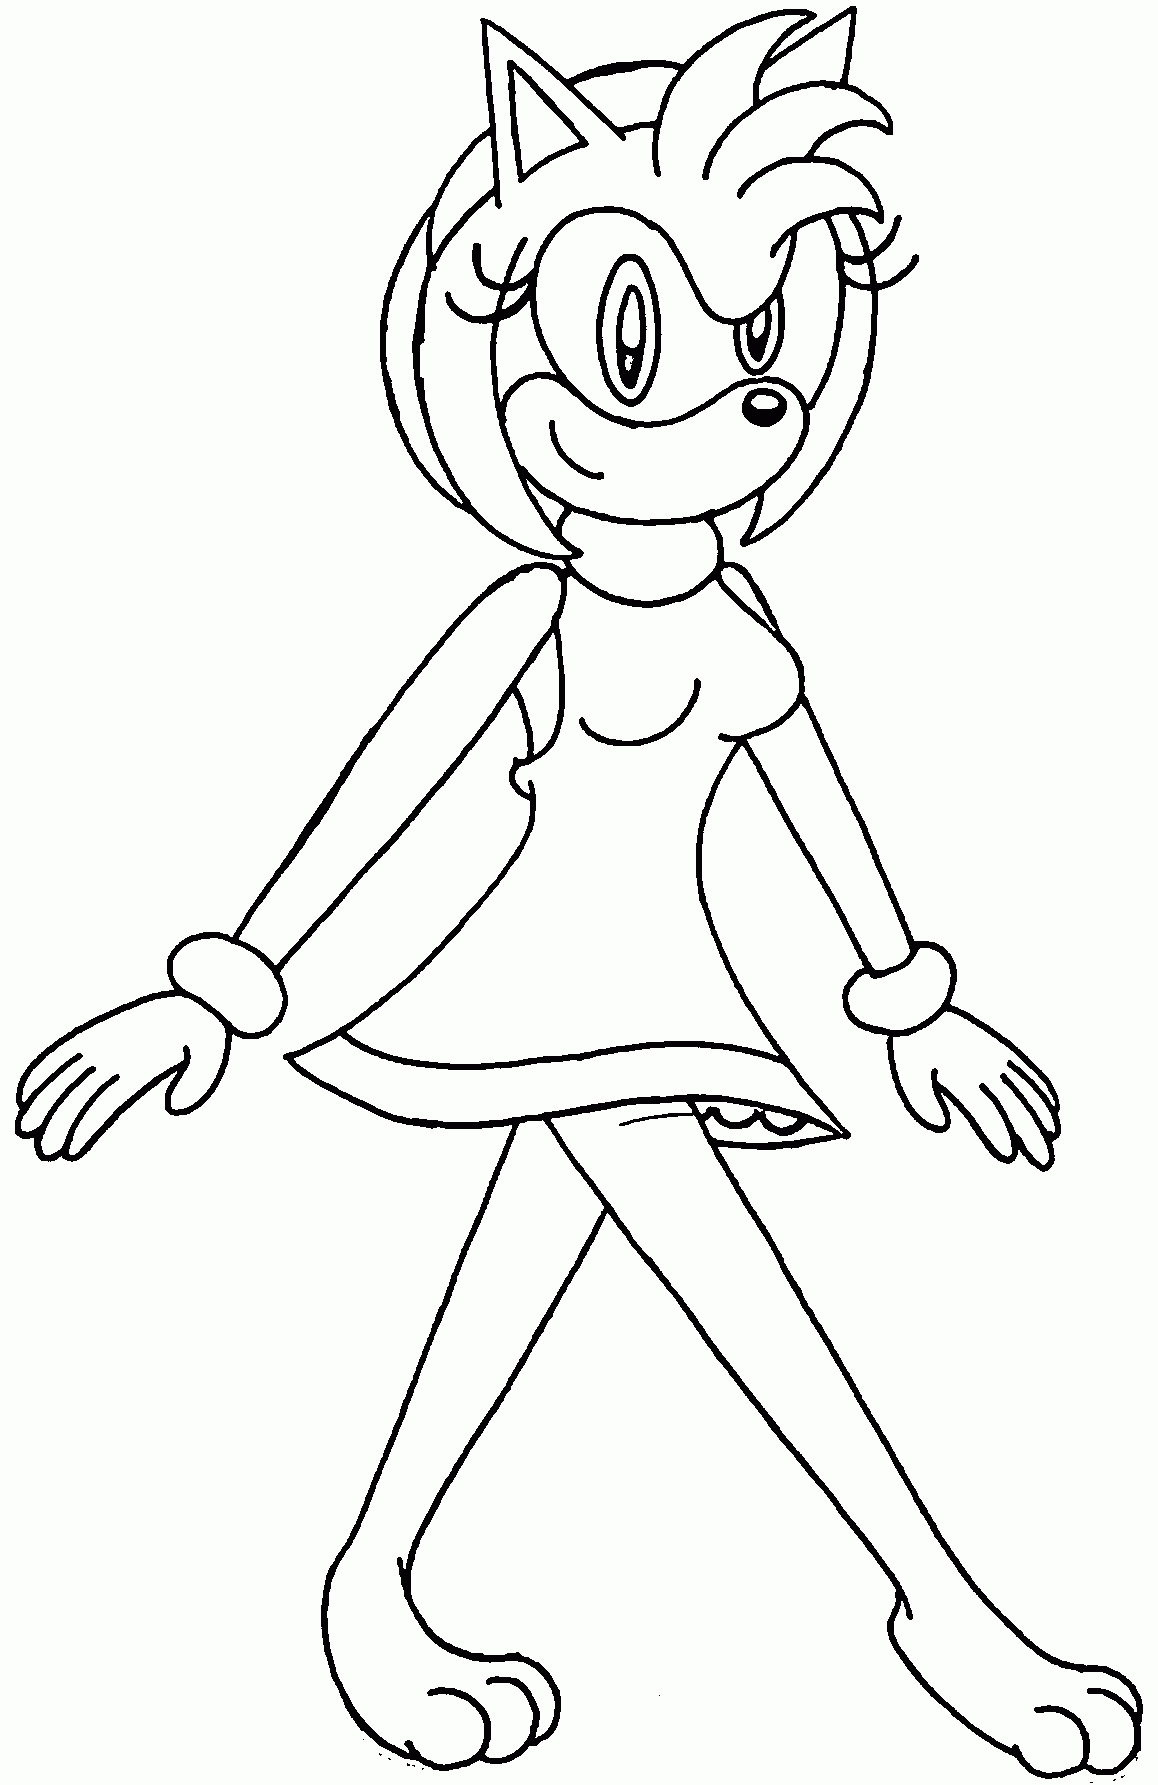 Amy Rose Walking Coloring Page - Wecoloringpage avec Coloriage Amy Rose